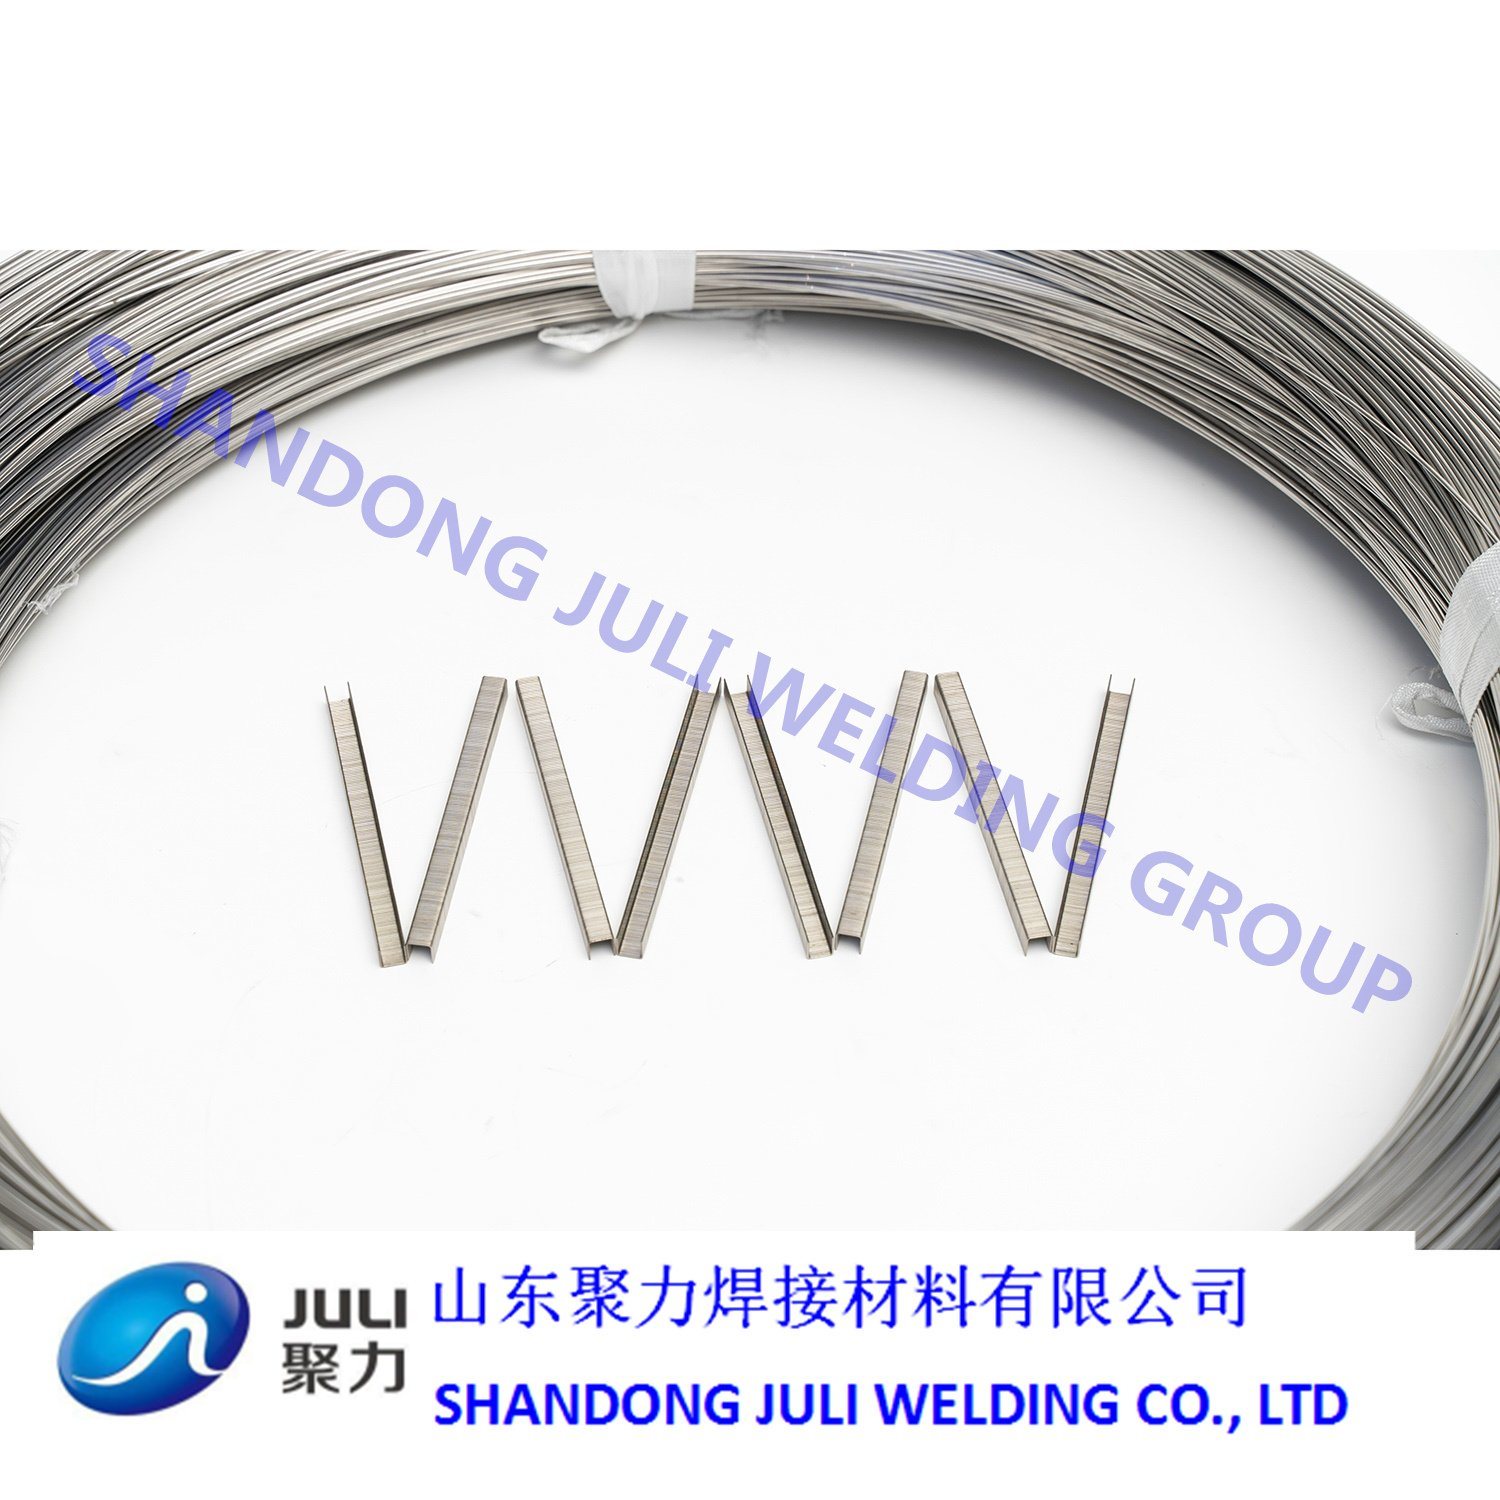 Ss Stainless Steel Wire High Tensile Strength 201 304 316 Cold Drawn Bright Side Corrosion Resistant Stainless Steel Redrawing and Annealing Wire